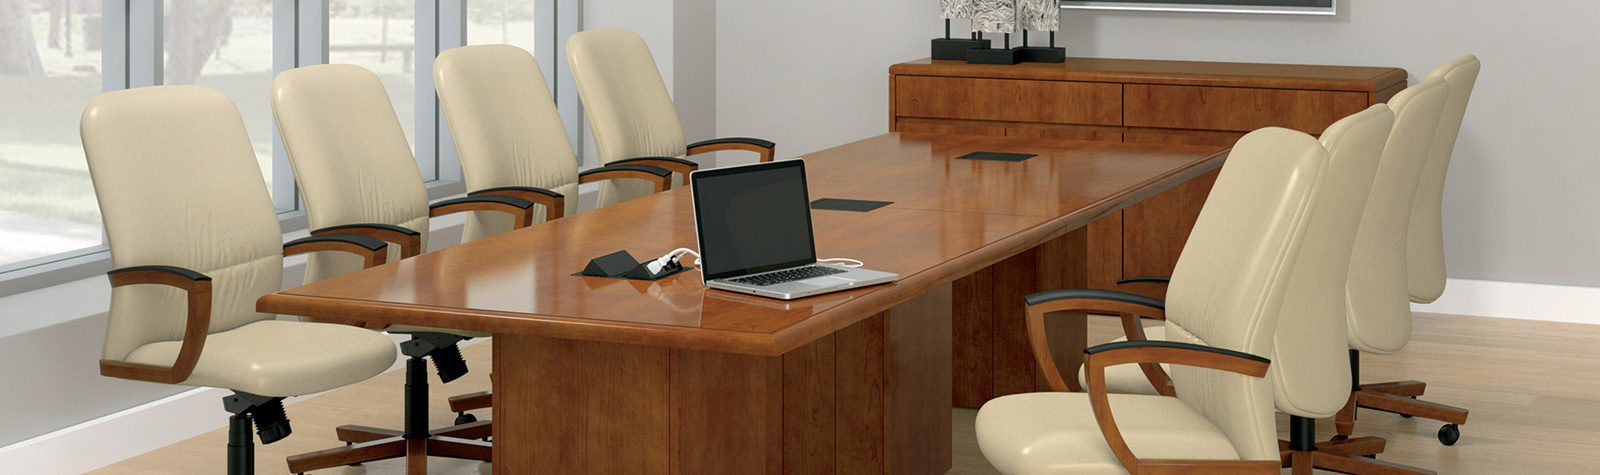 Interior Resource Group Inc Quality Office Furniture For